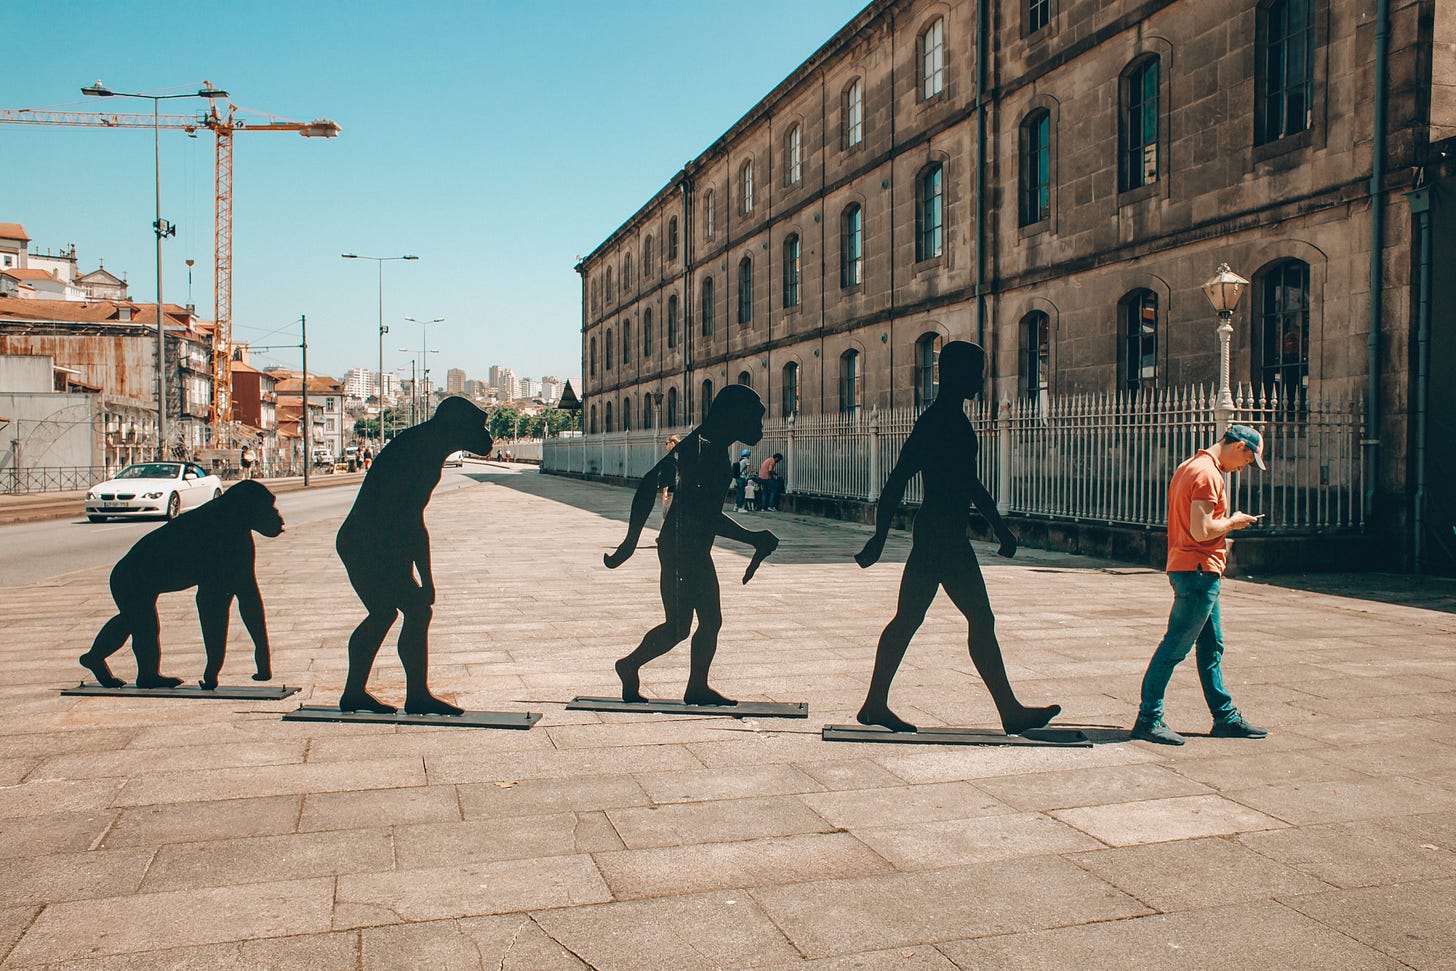 Statues on a sidewalk showing the evolution from ape to human while the last is a real human looking down on his mobile phone